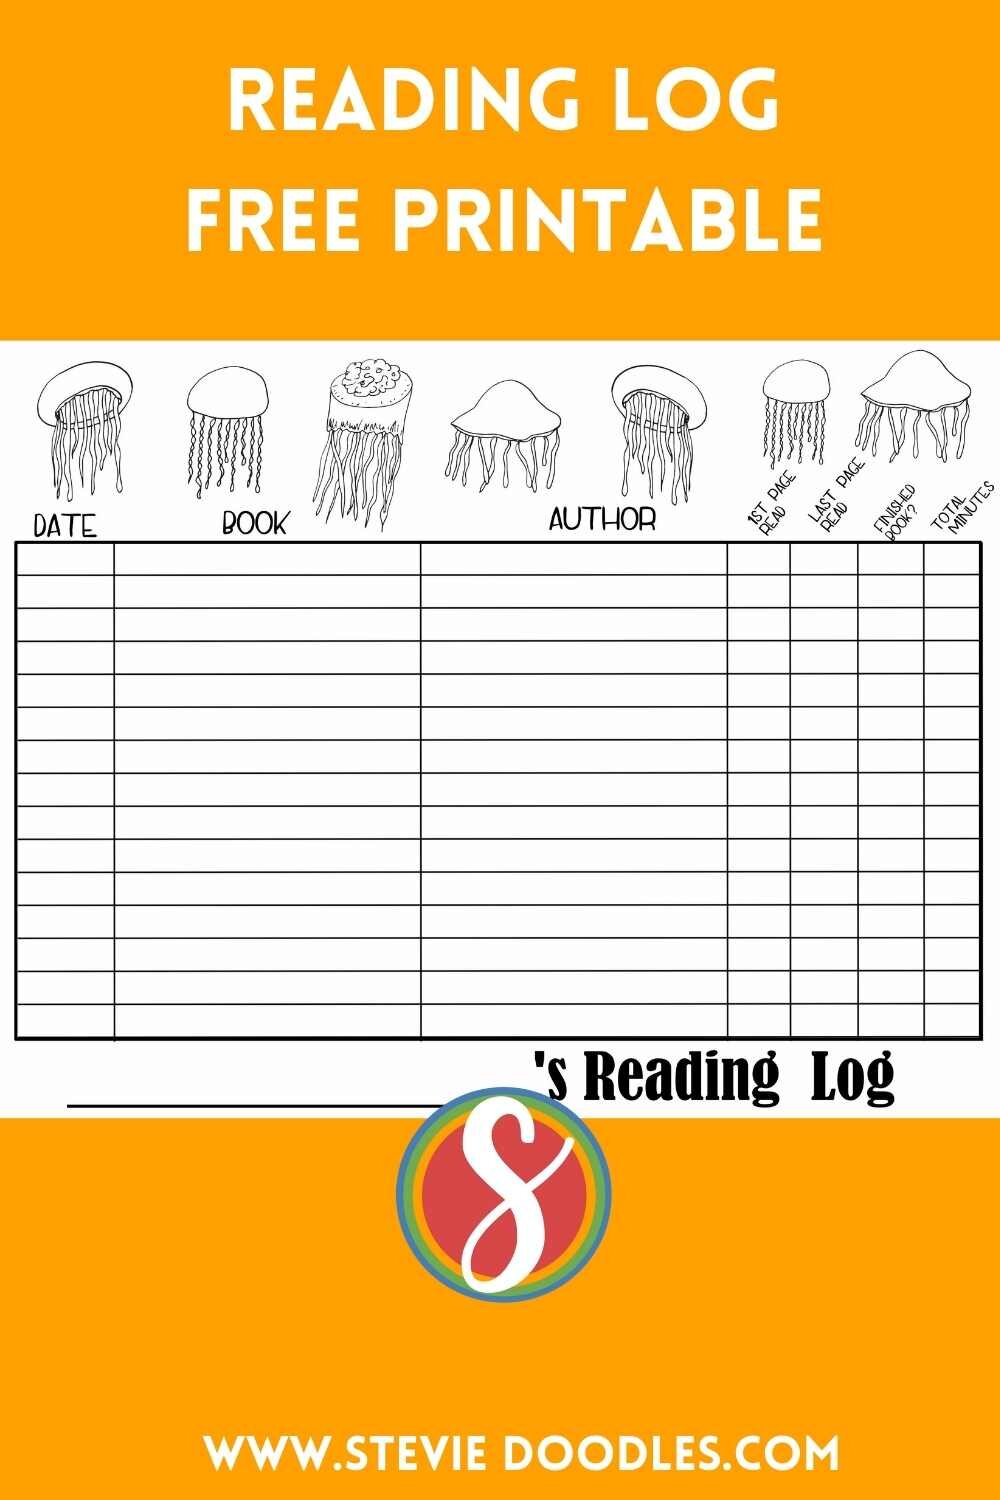 Free printable reading log to track your reading for your reading program - with jellyfish from Stevie Doodles